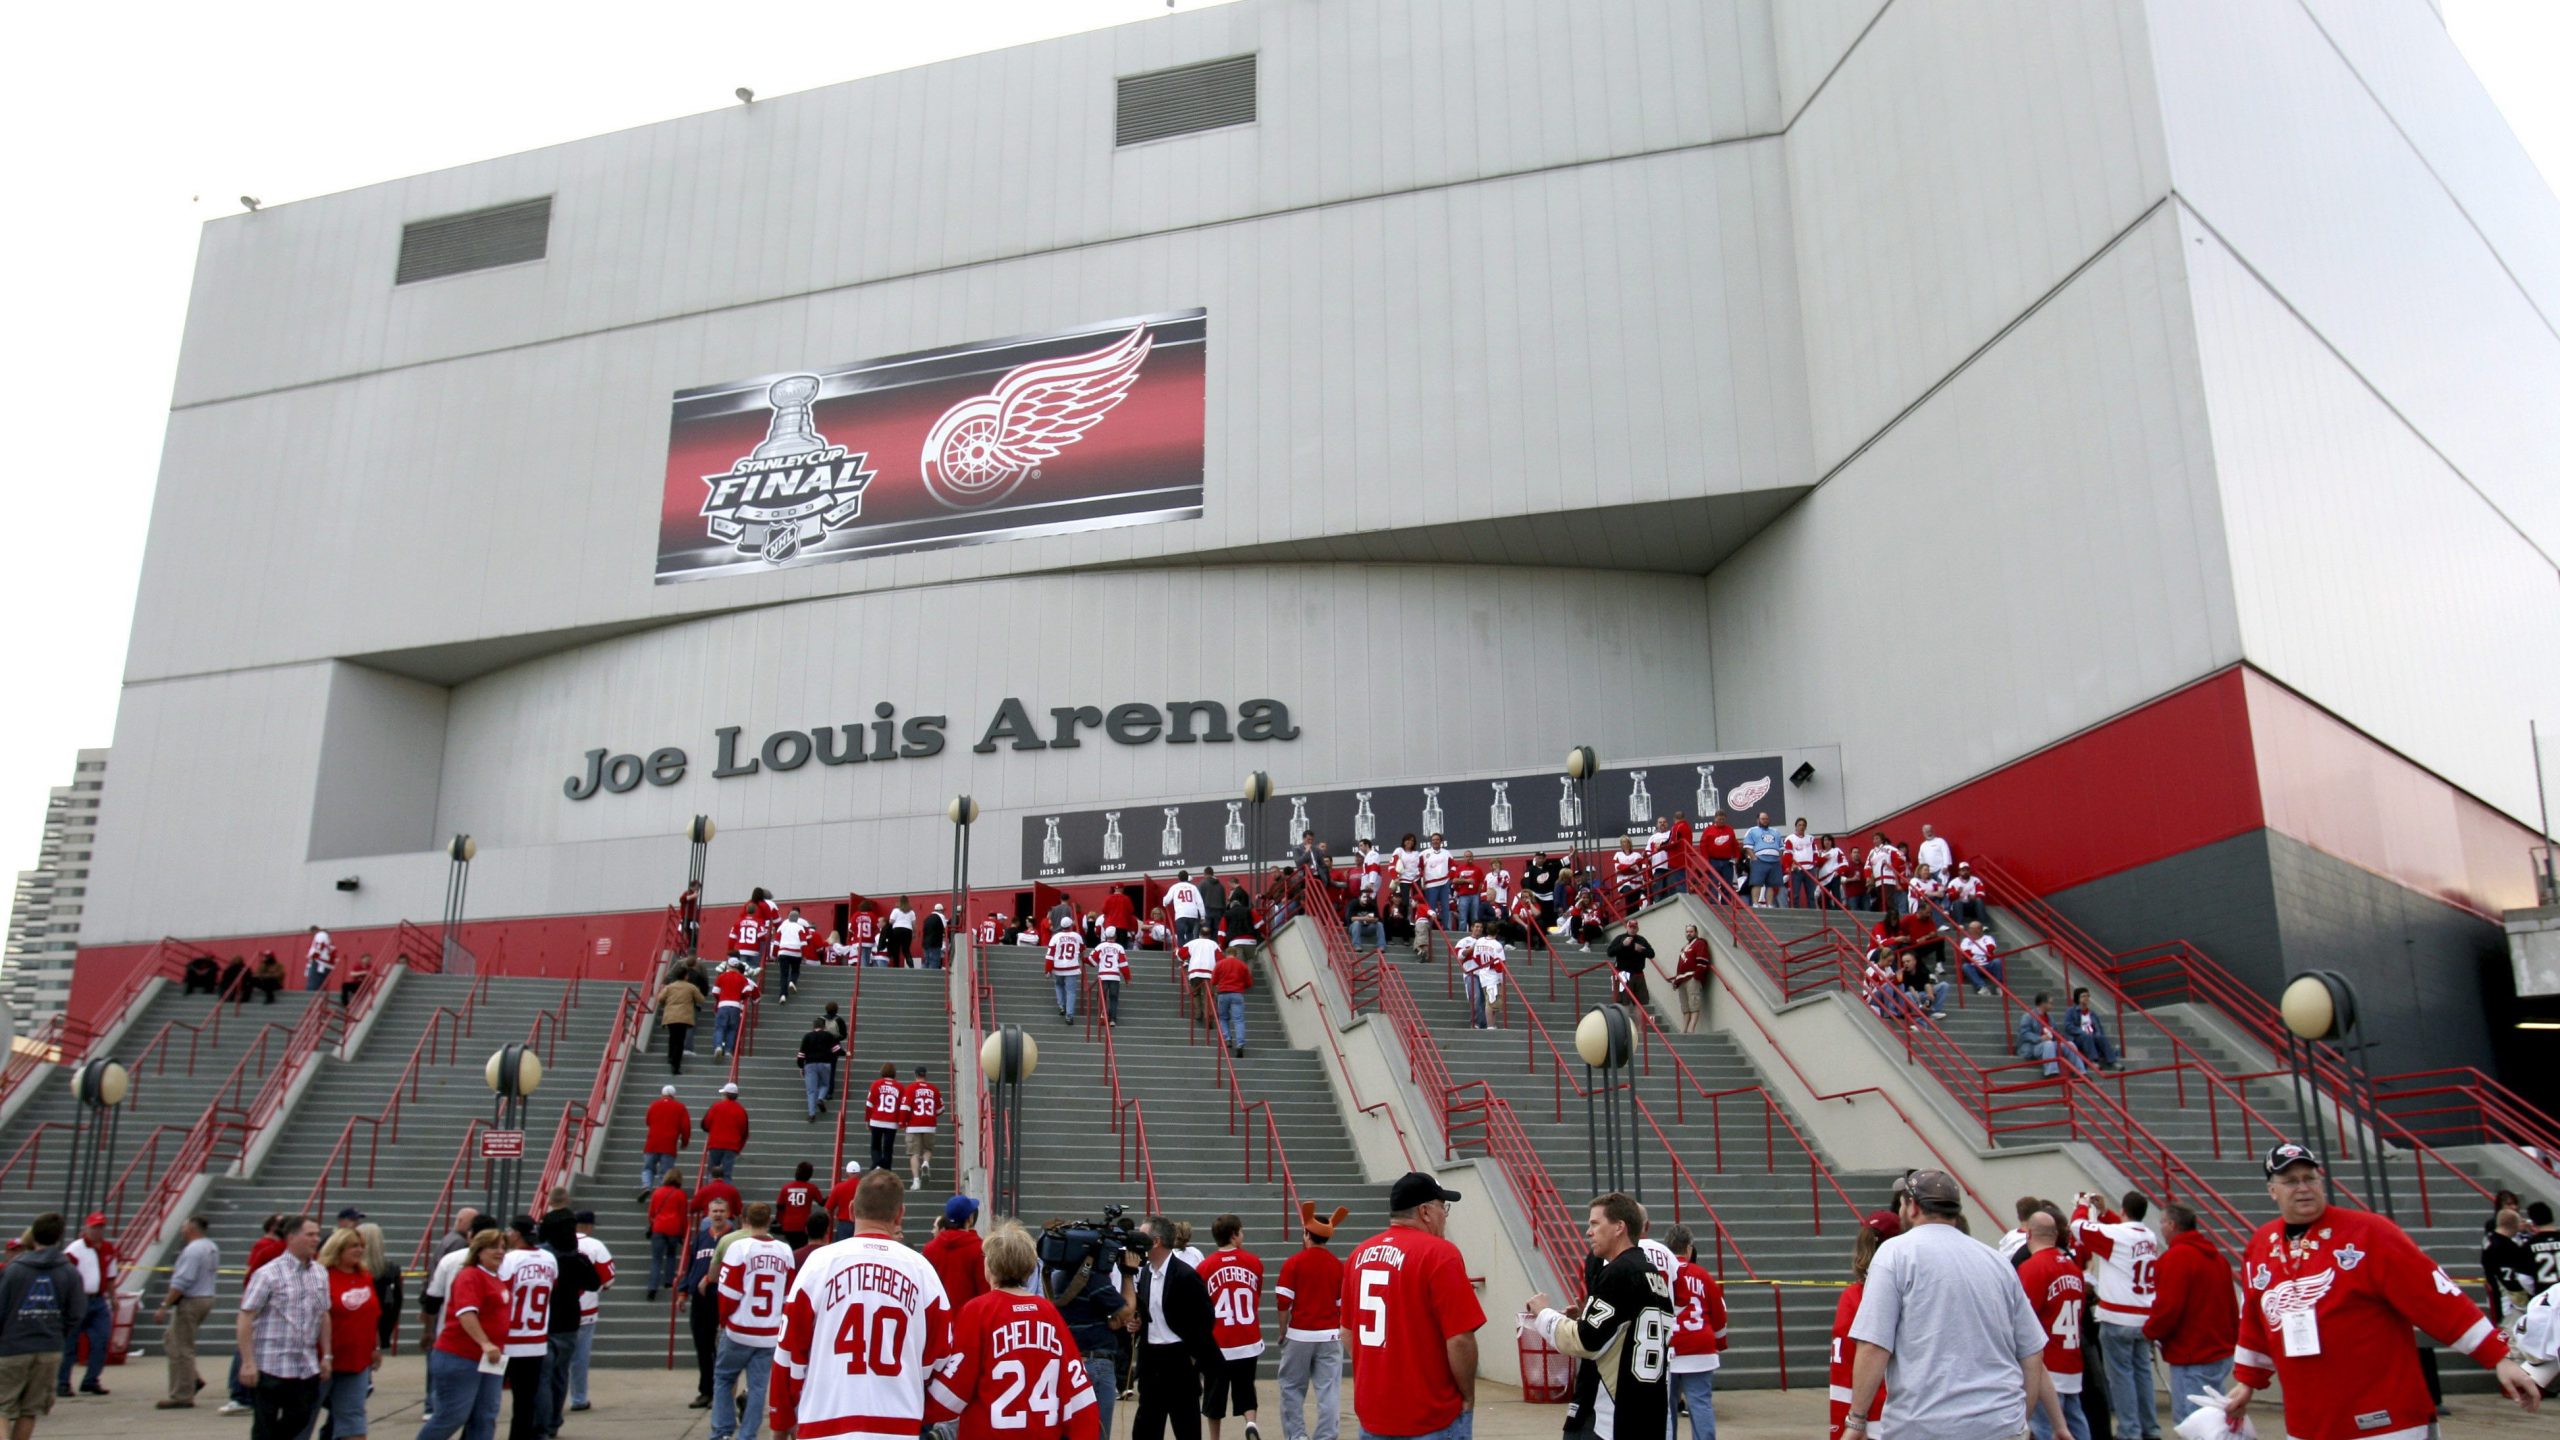 State to pay for Joe Louis demolition in Detroit